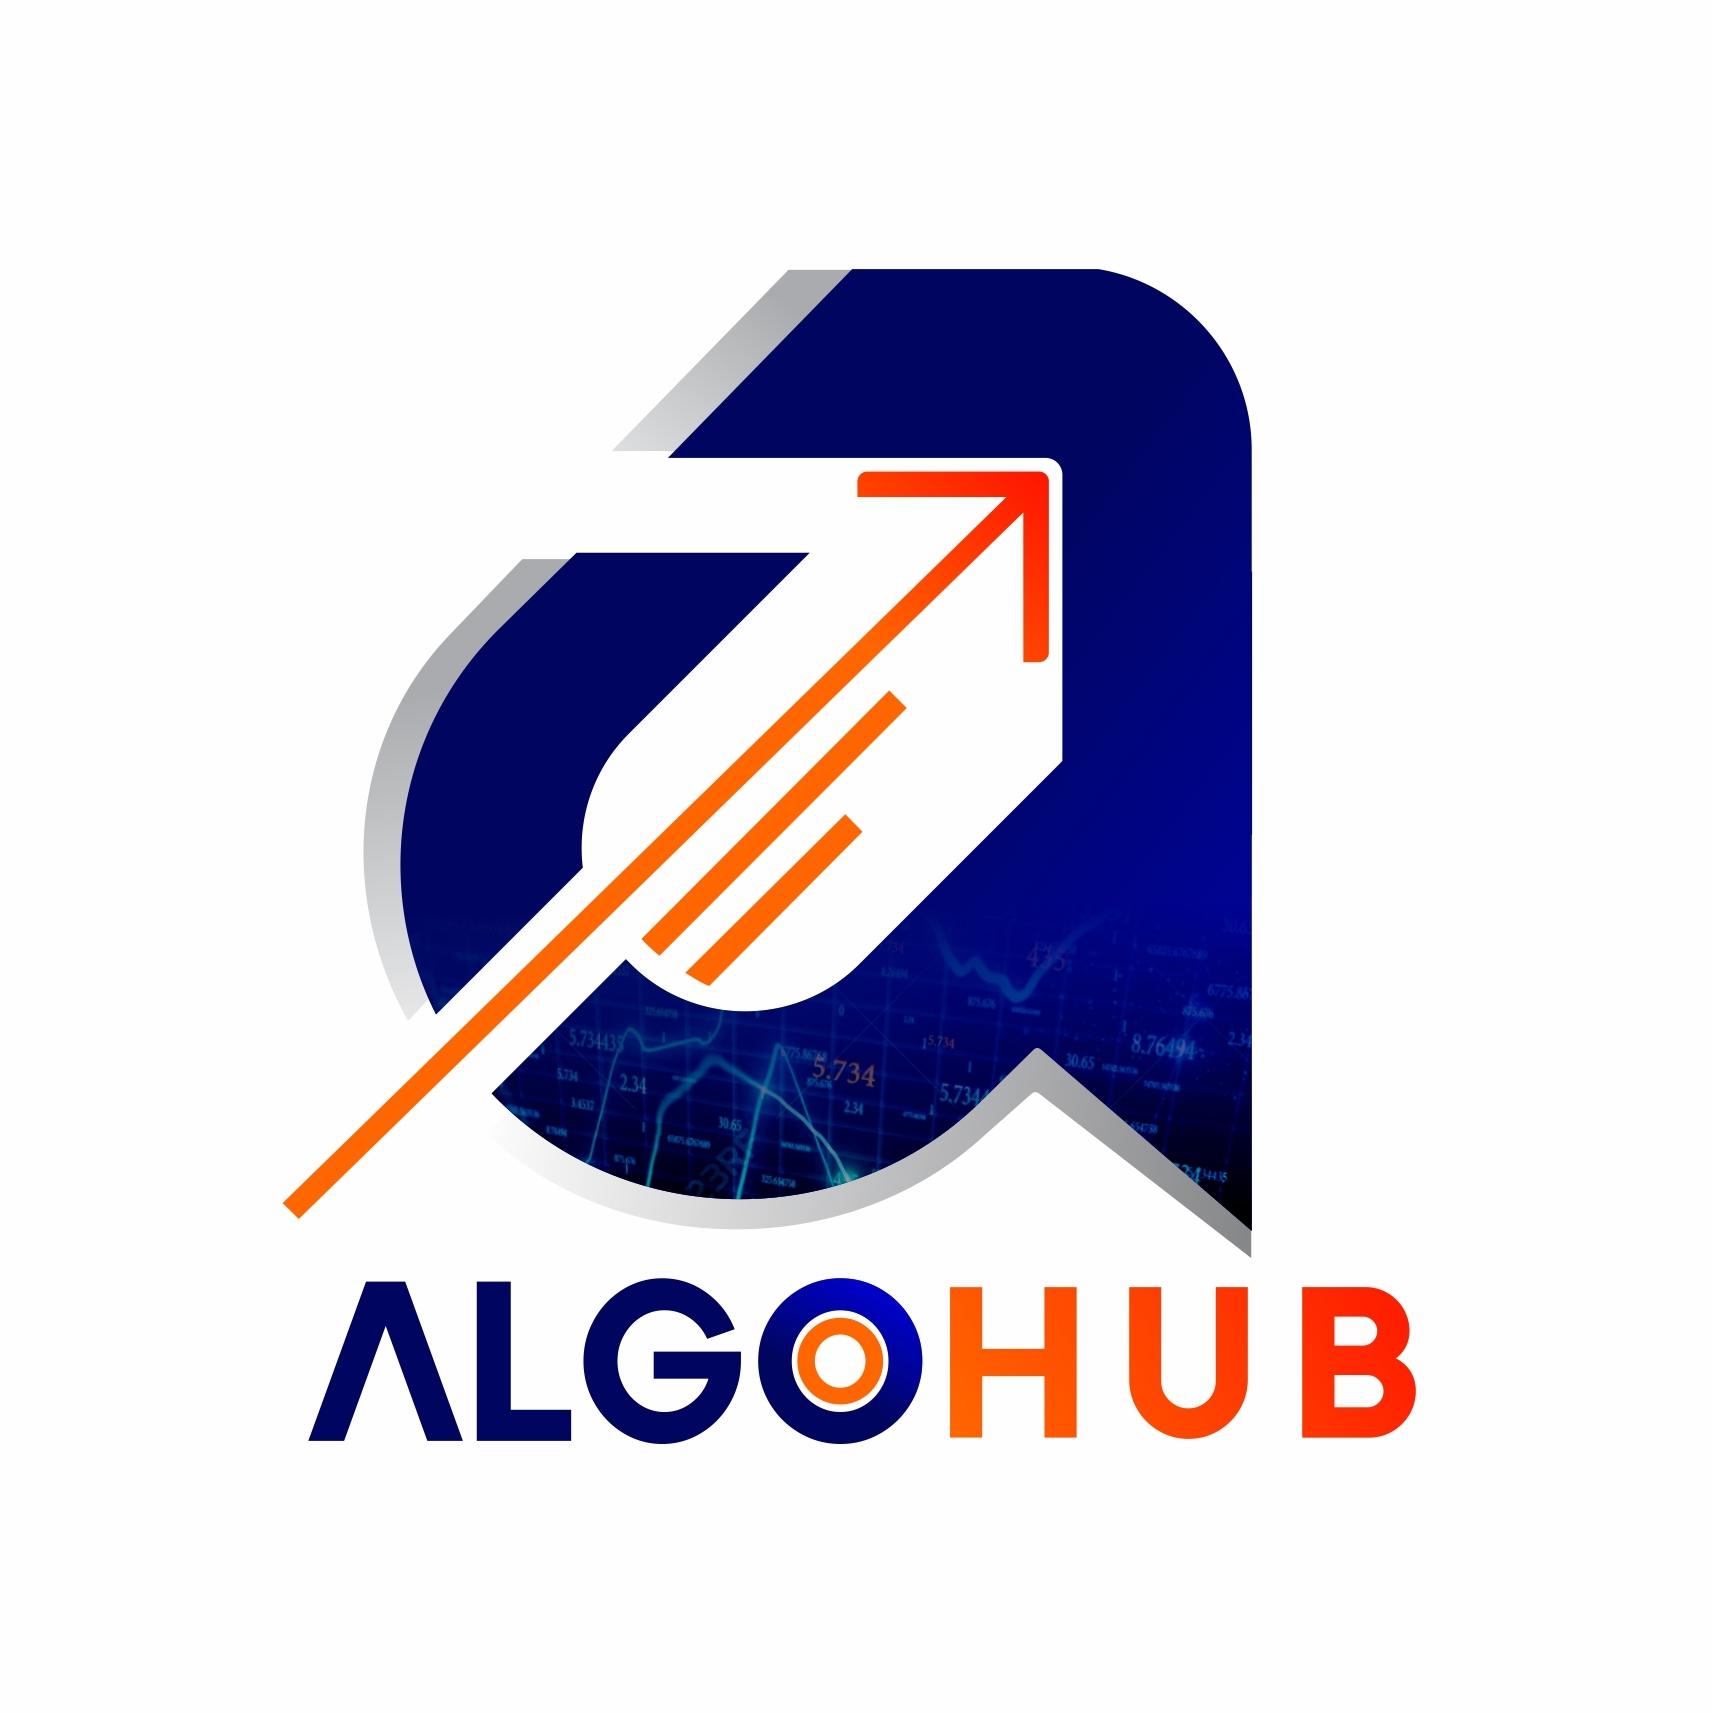 ALGOHUB - Sniper Entry Course Download